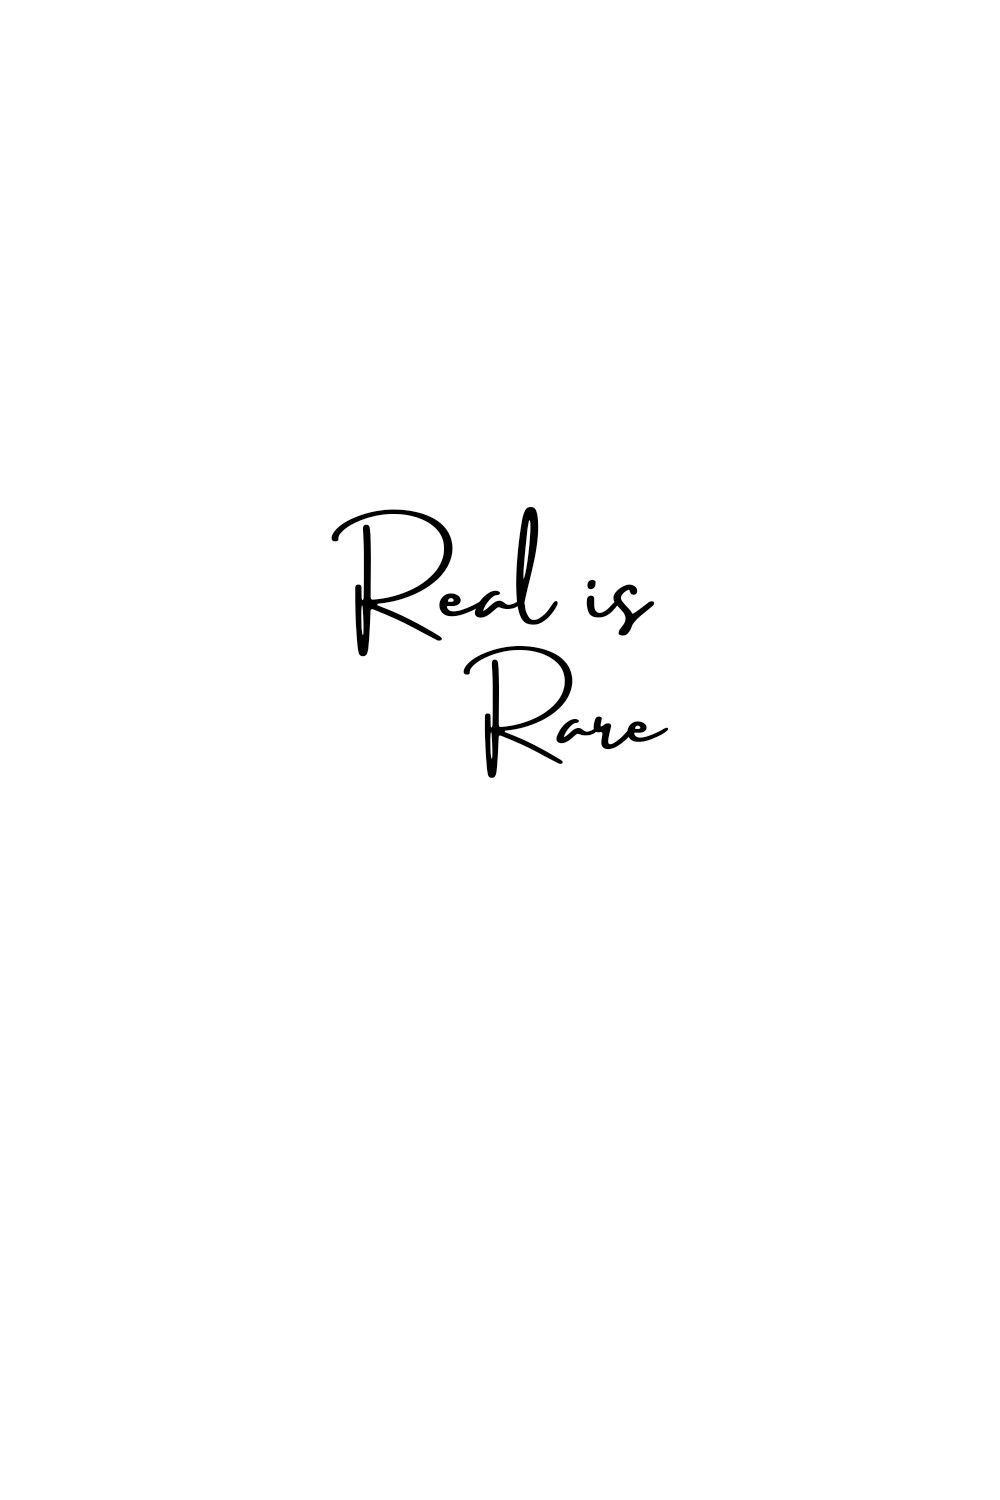 Real is Rare quote. Rare quote, Quotes white, Cute short quotes